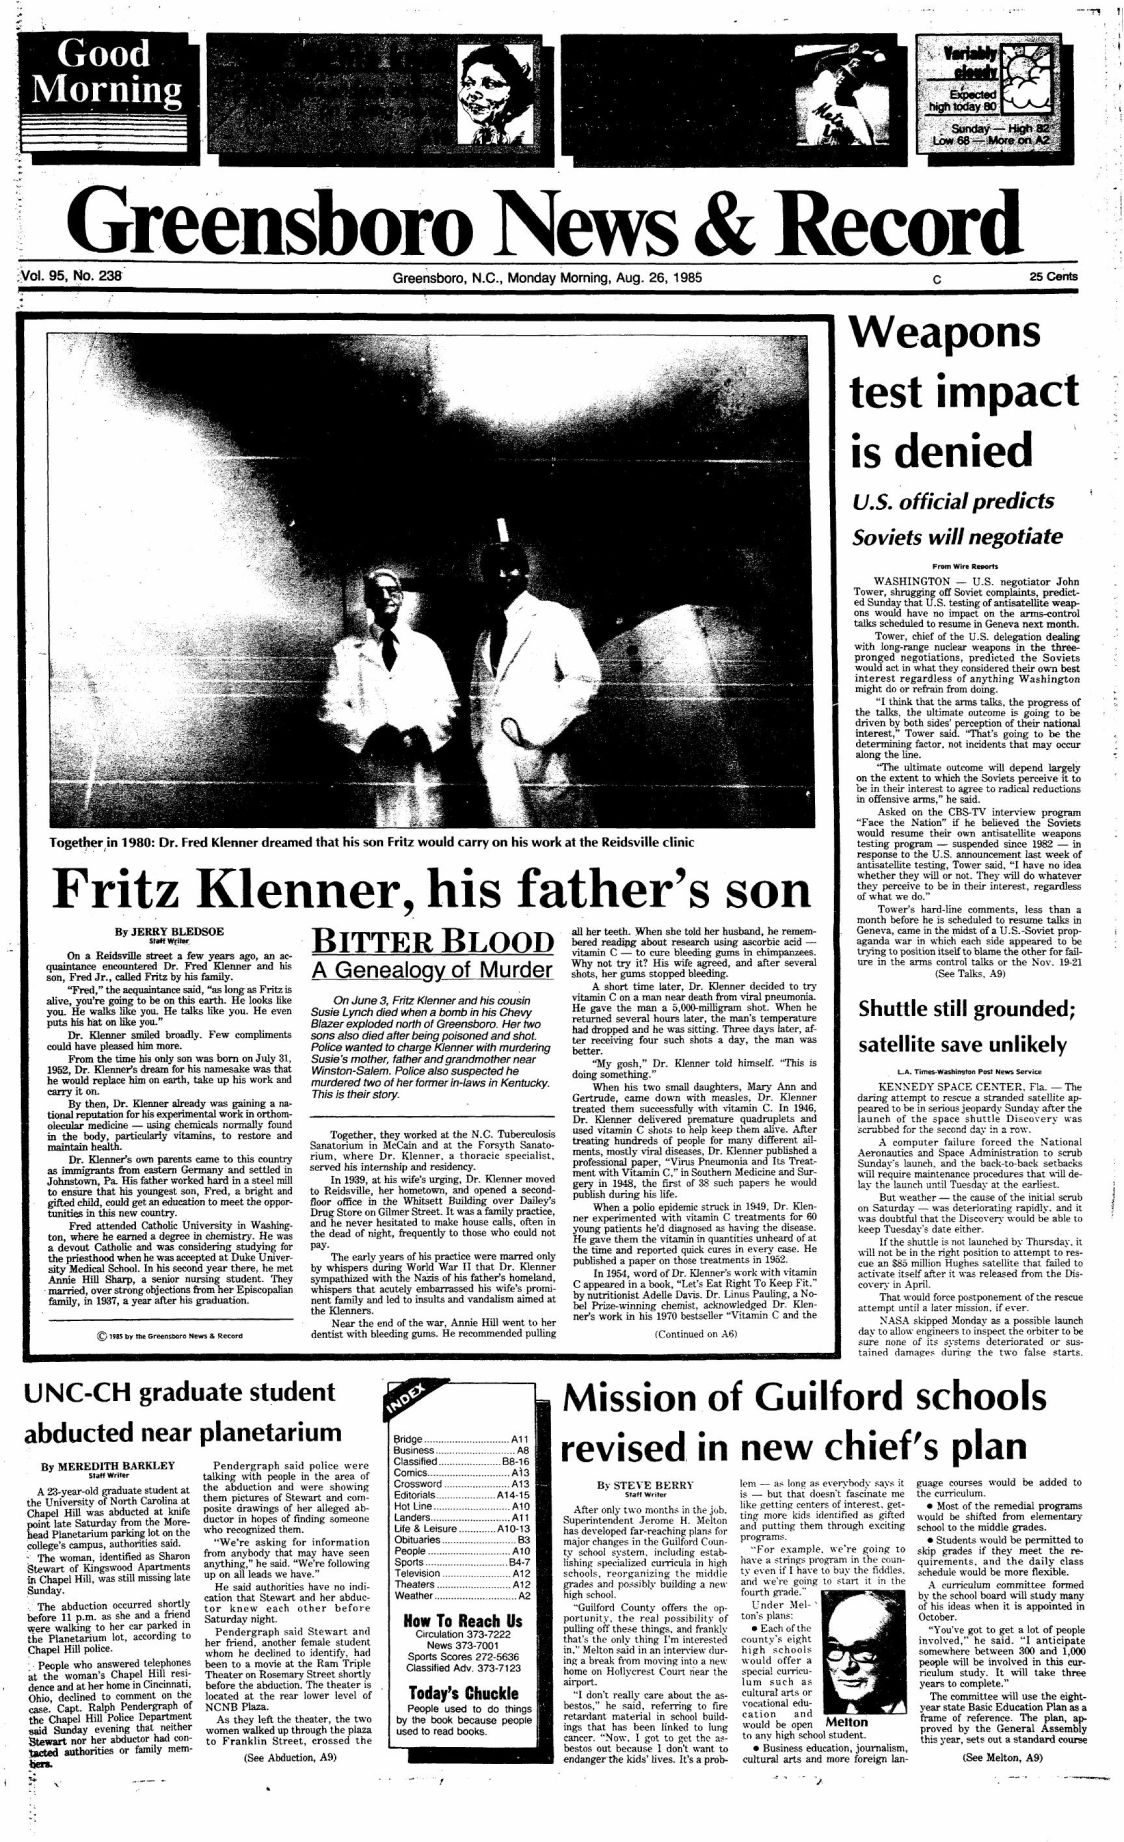 Bitter Blood: Fritz Klenner, his father's son | | greensboro.com